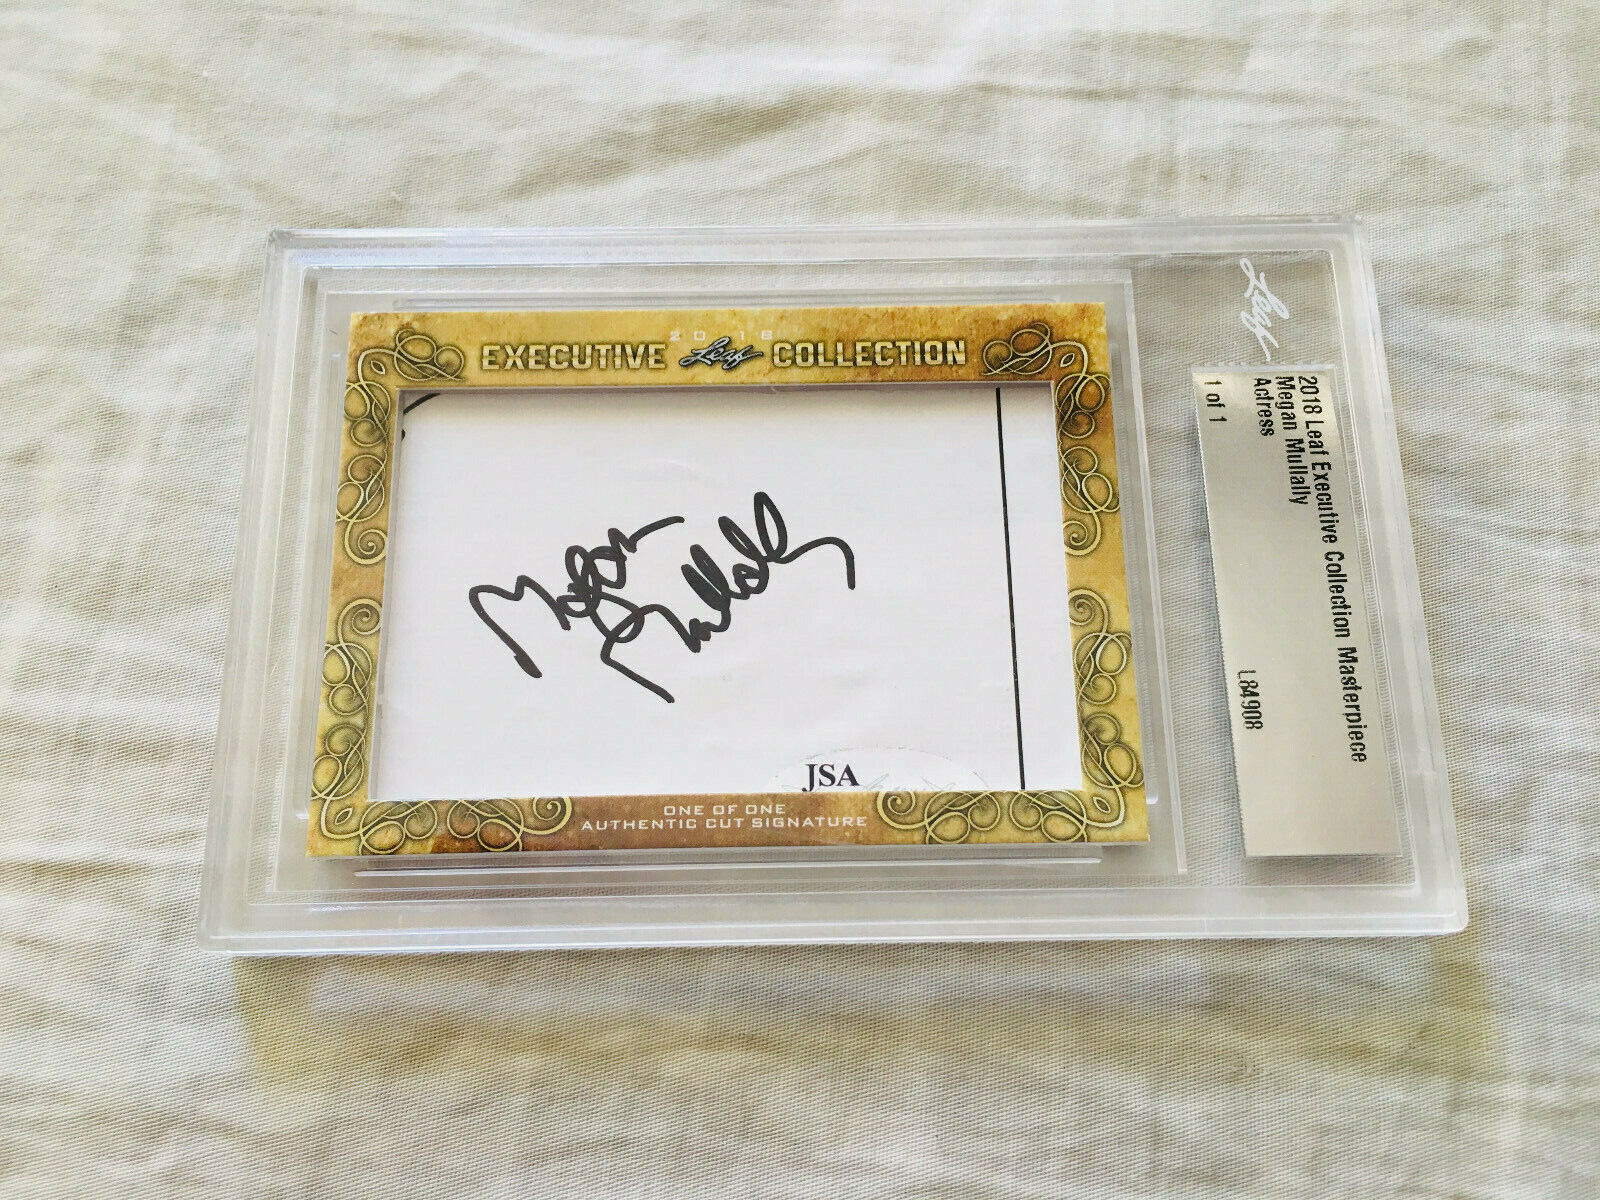 Megan Mullally 2018 Leaf Masterpiece Cut Signature signed 1/1 JSA Will and Grace